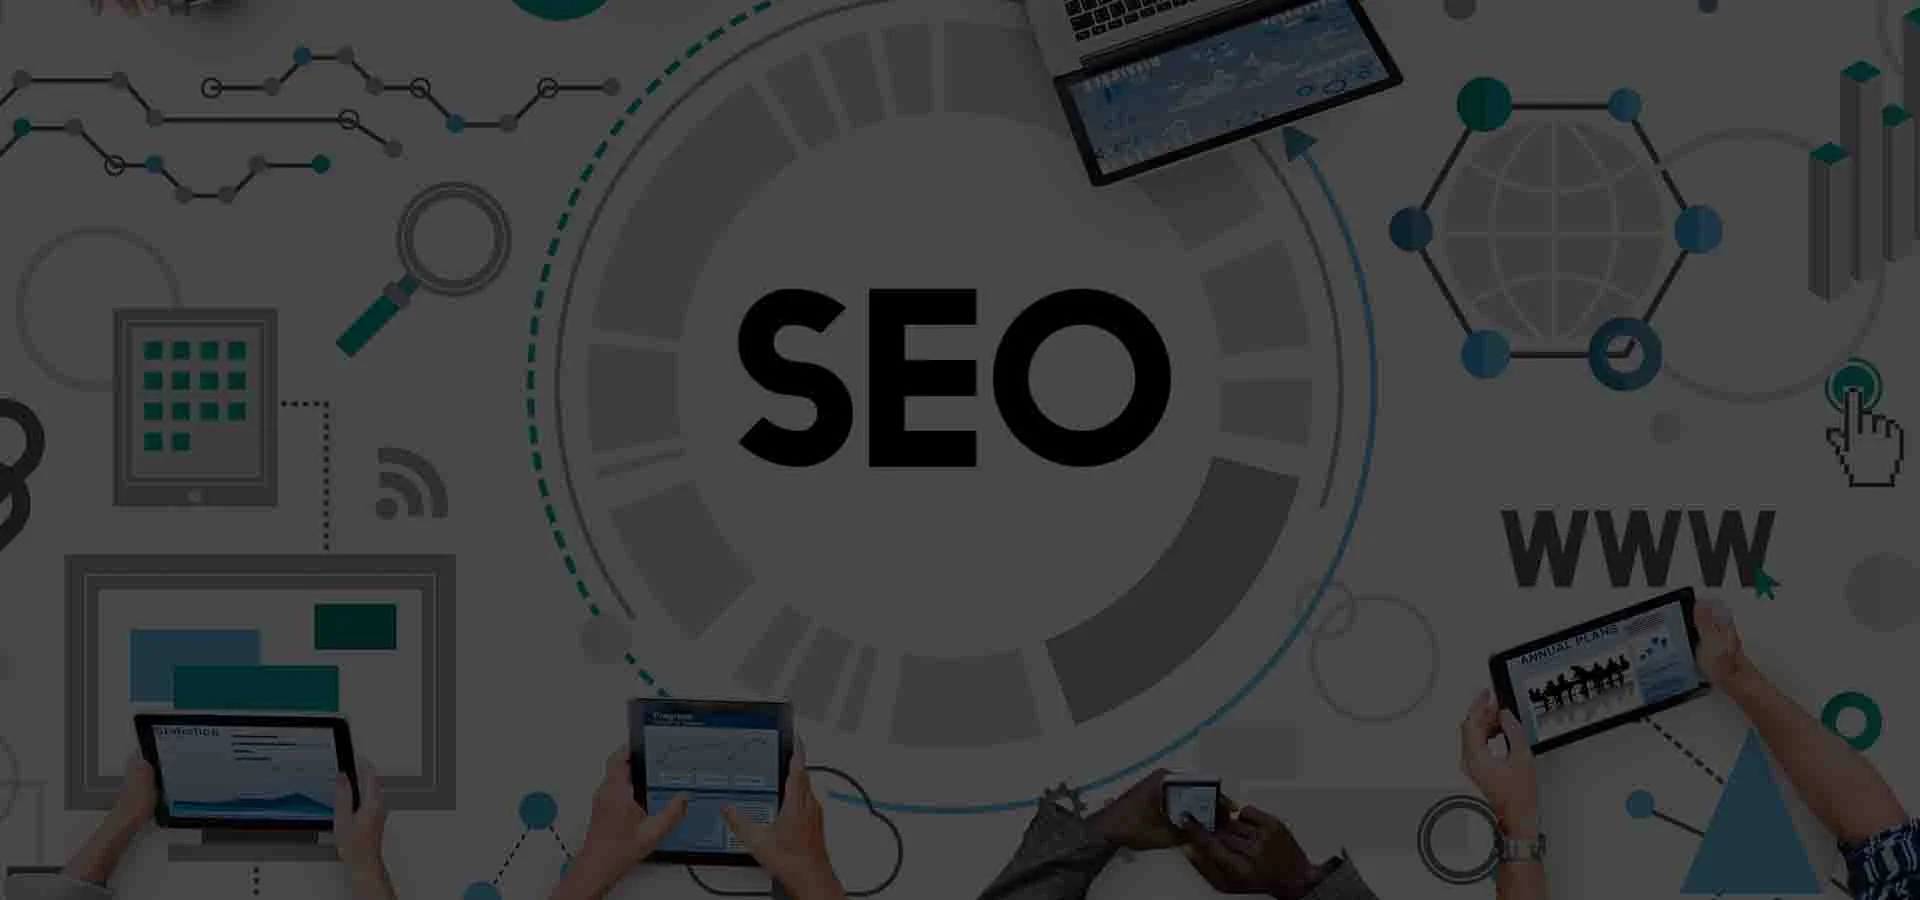 what-are-the-top-10-seo-tactics-beneficial-for-businesses-in-2020-related-blog-18